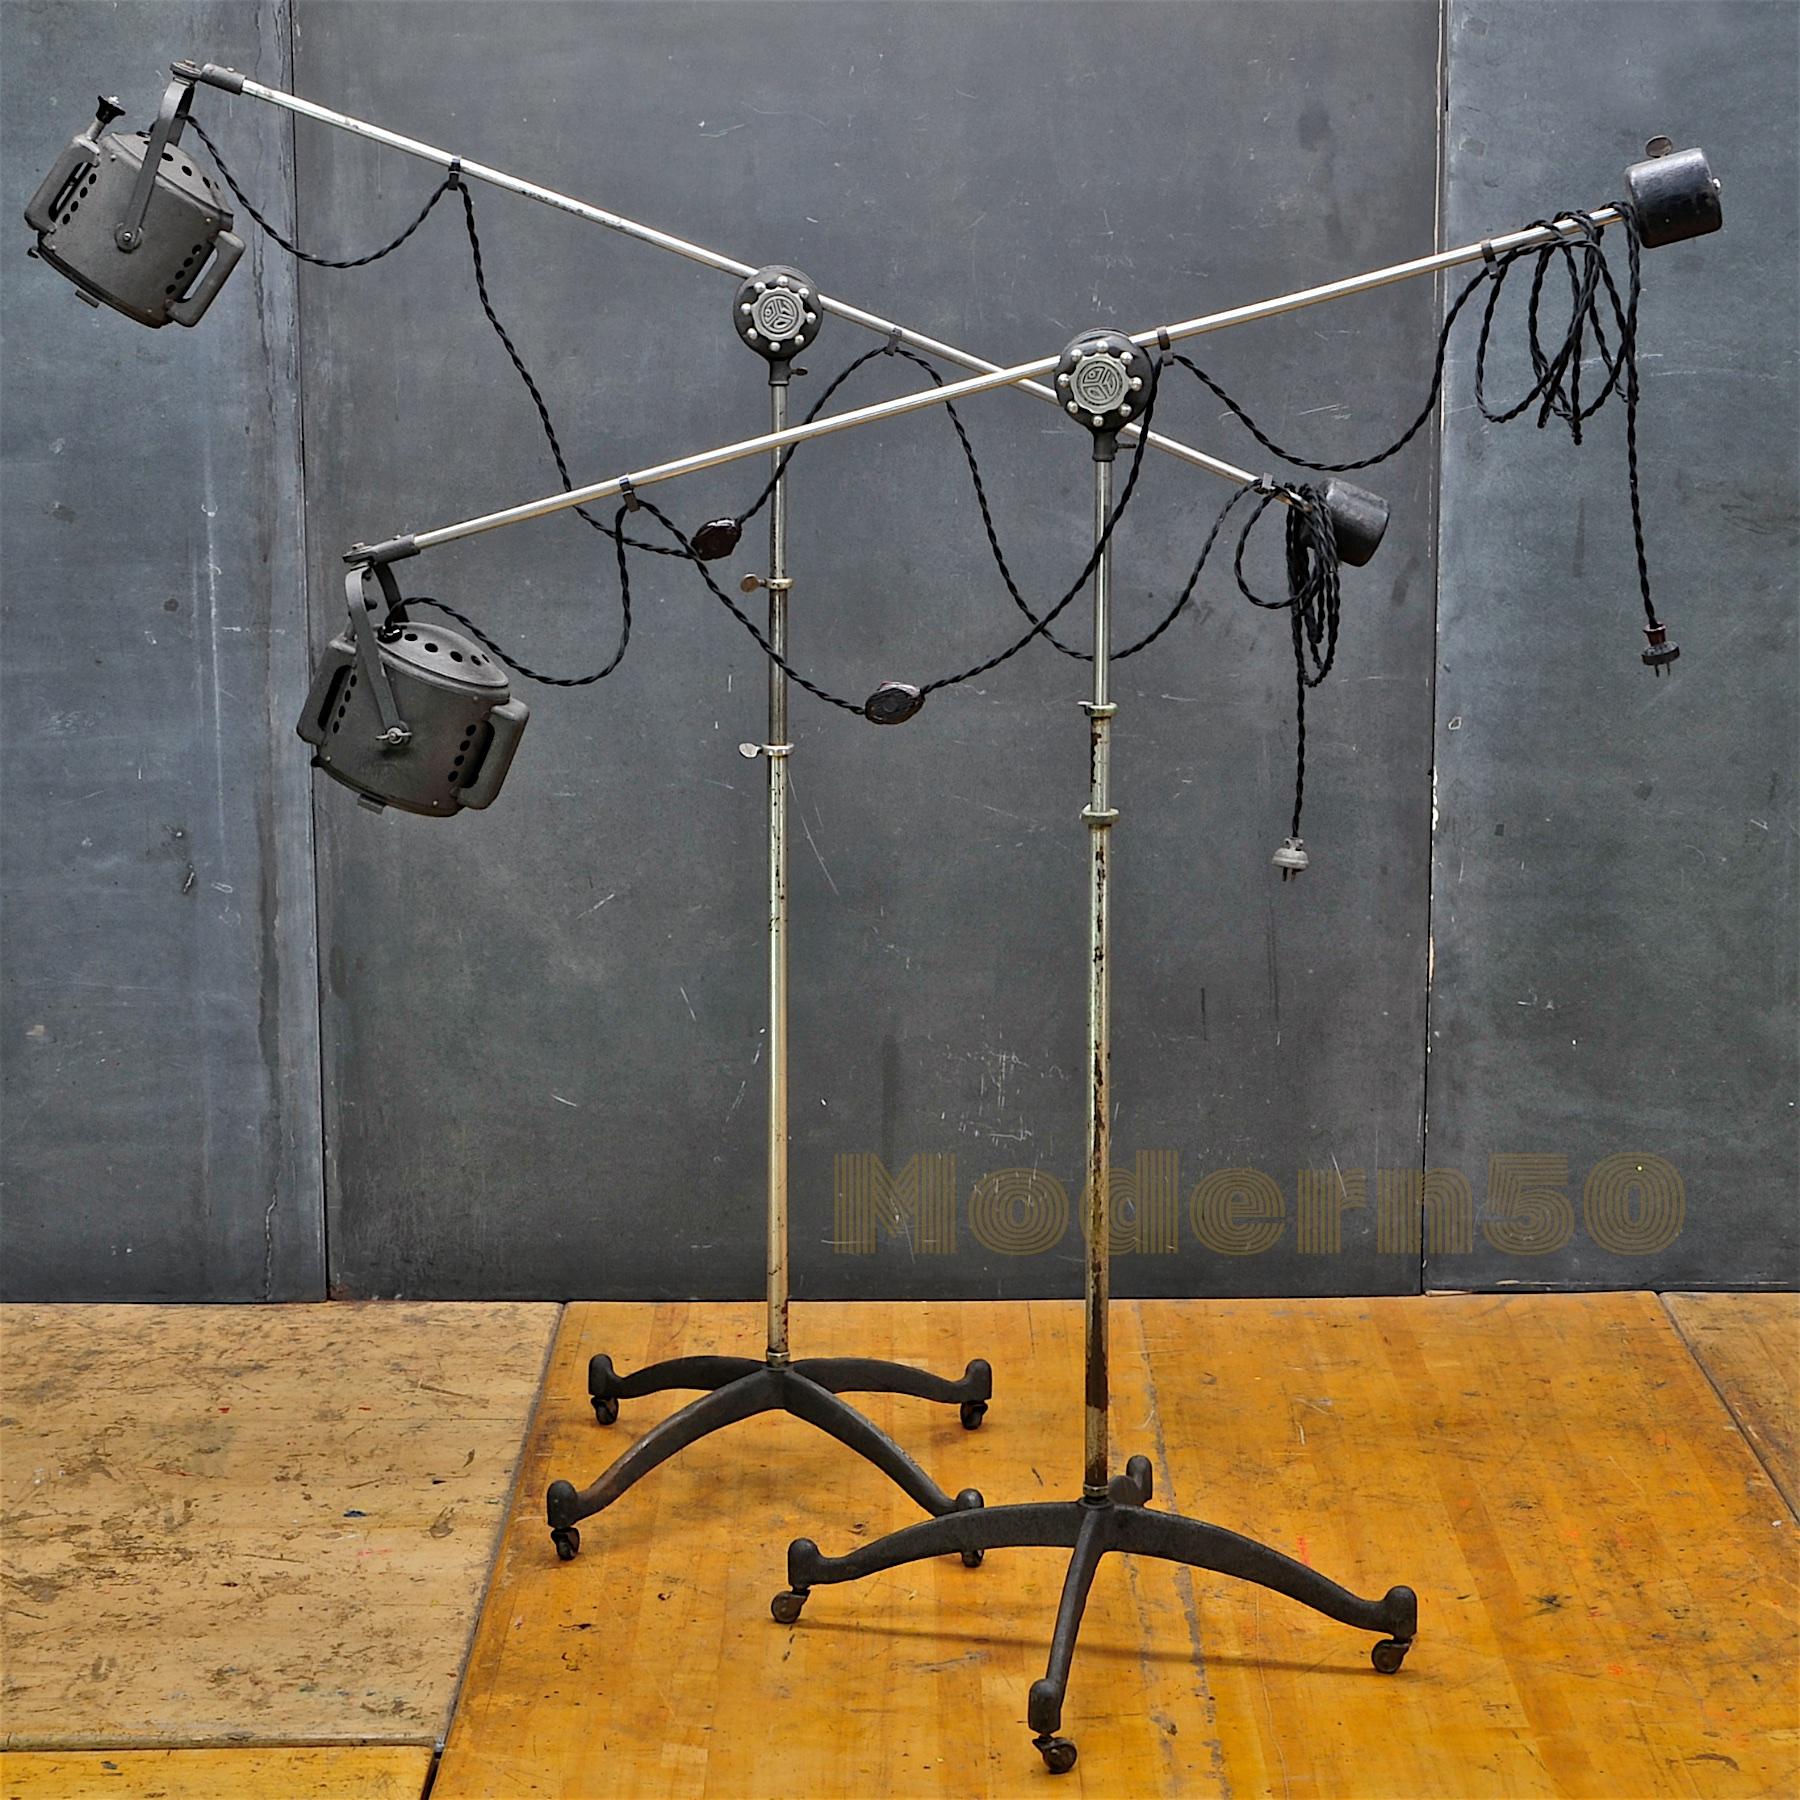 Wild studio lights. Pair. Vintage industrial photogenic machine company Theater TV Studio floor lamps. Rewired with original line switches. 

Measures: W 55 x D 25 x H 38 to 82 in. (Height Measured from Floor to Knuckle Knob).